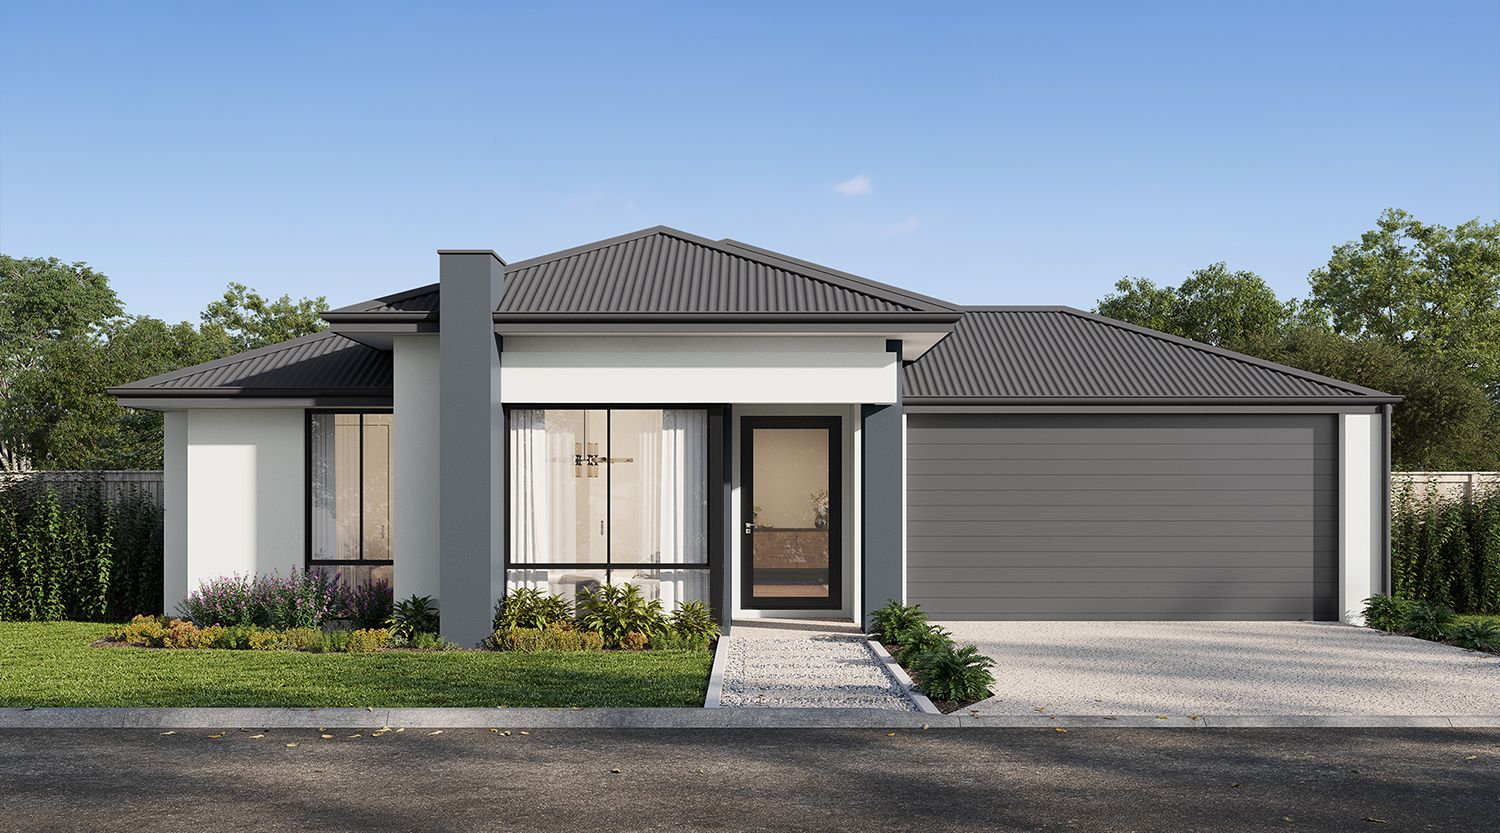 4 bedrooms New House & Land in Lot 158 Scenograph Rd SINAGRA WA, 6065